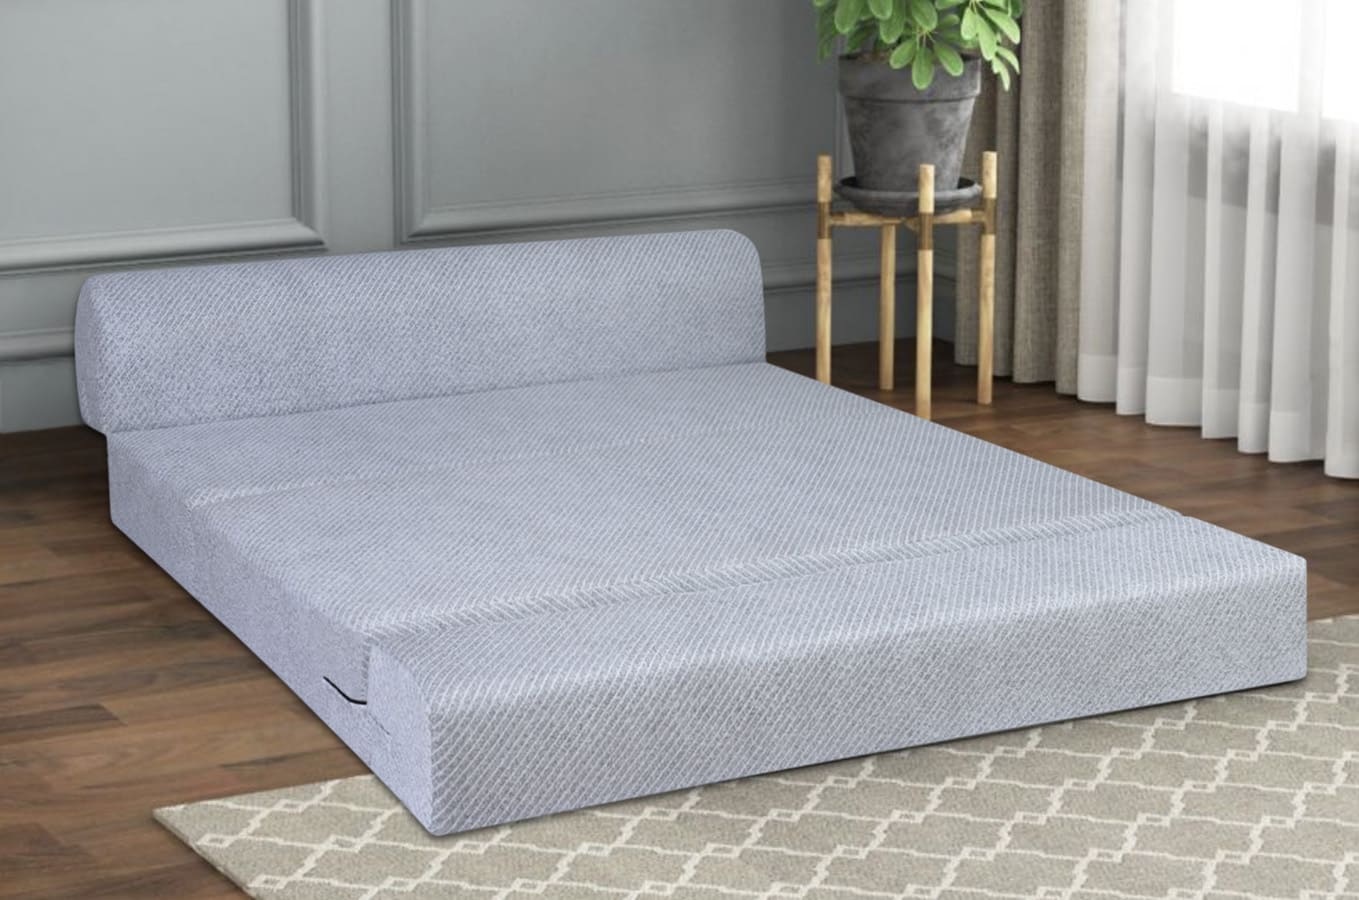 Bindal Sofa Cume Bed Queen Size 5X6.5 Feet 60X78 Thickness 8 Inch